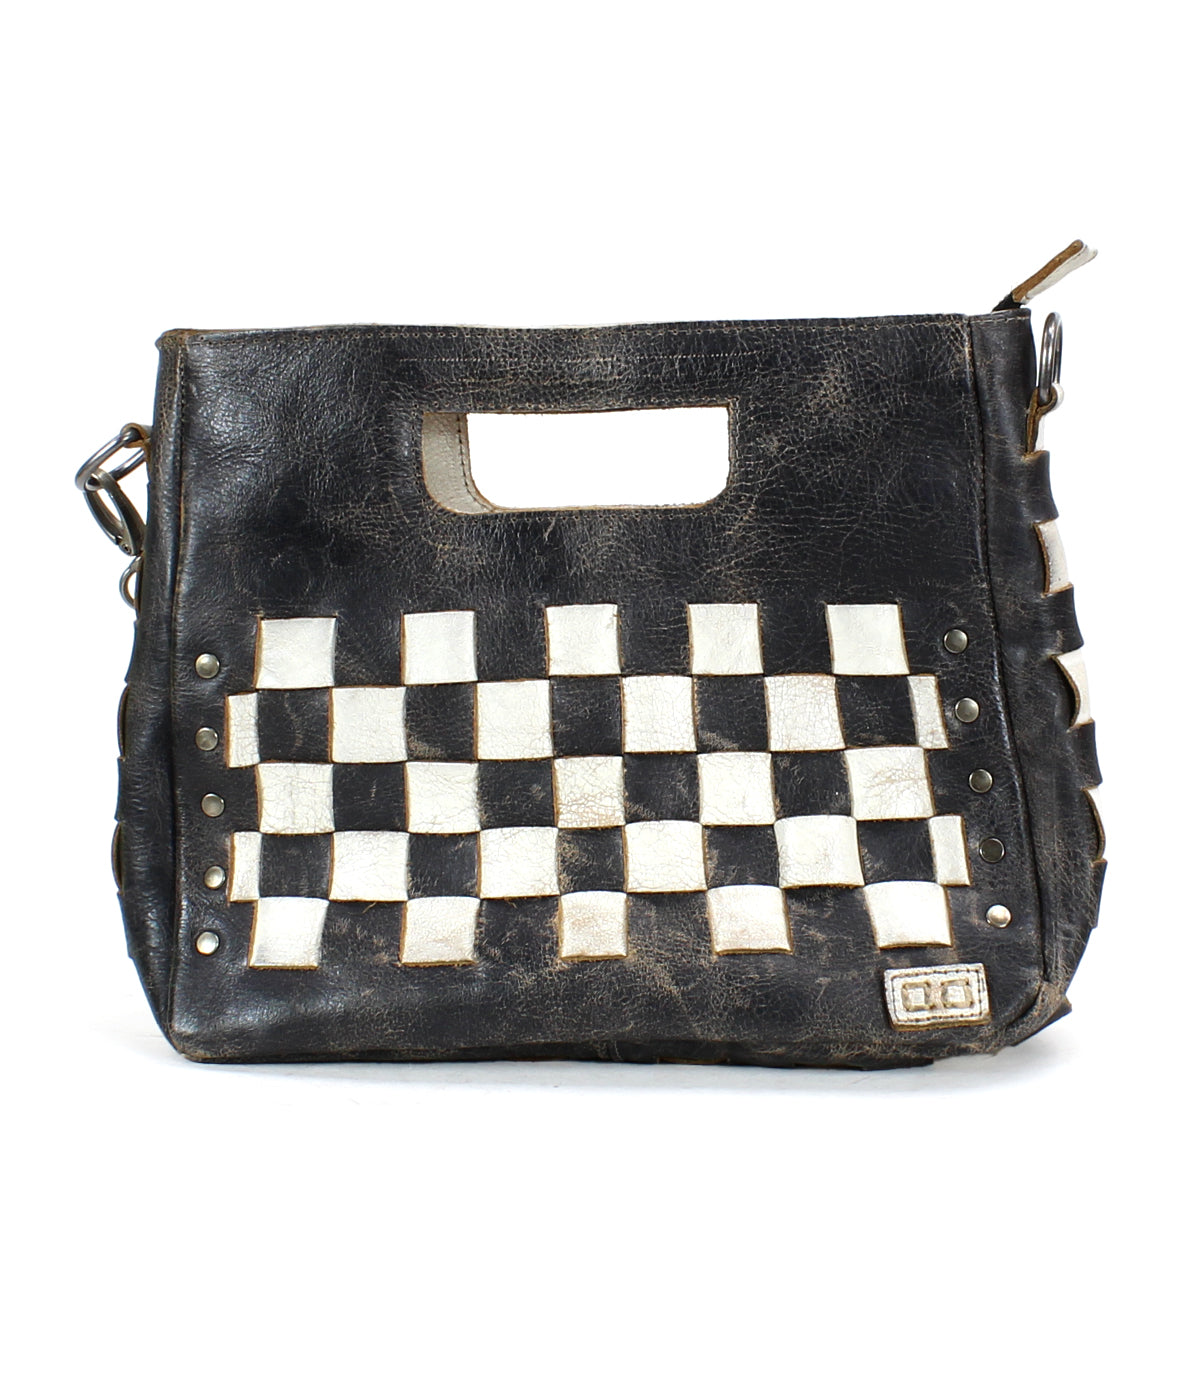 A black and white checkered Keiki crossbody bag with woven panels by Bed Stu.